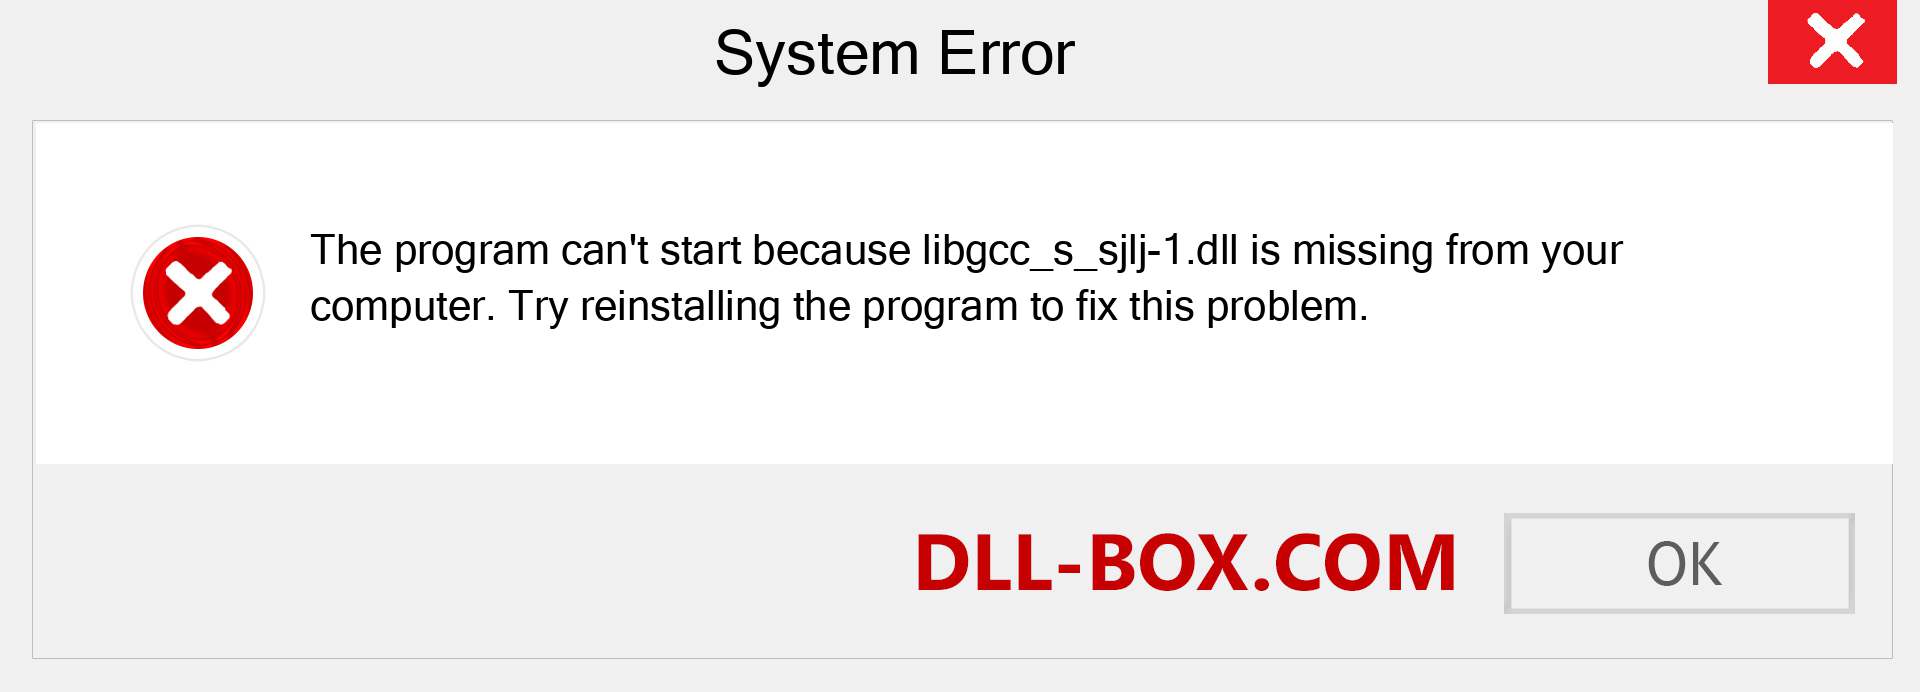  libgcc_s_sjlj-1.dll file is missing?. Download for Windows 7, 8, 10 - Fix  libgcc_s_sjlj-1 dll Missing Error on Windows, photos, images